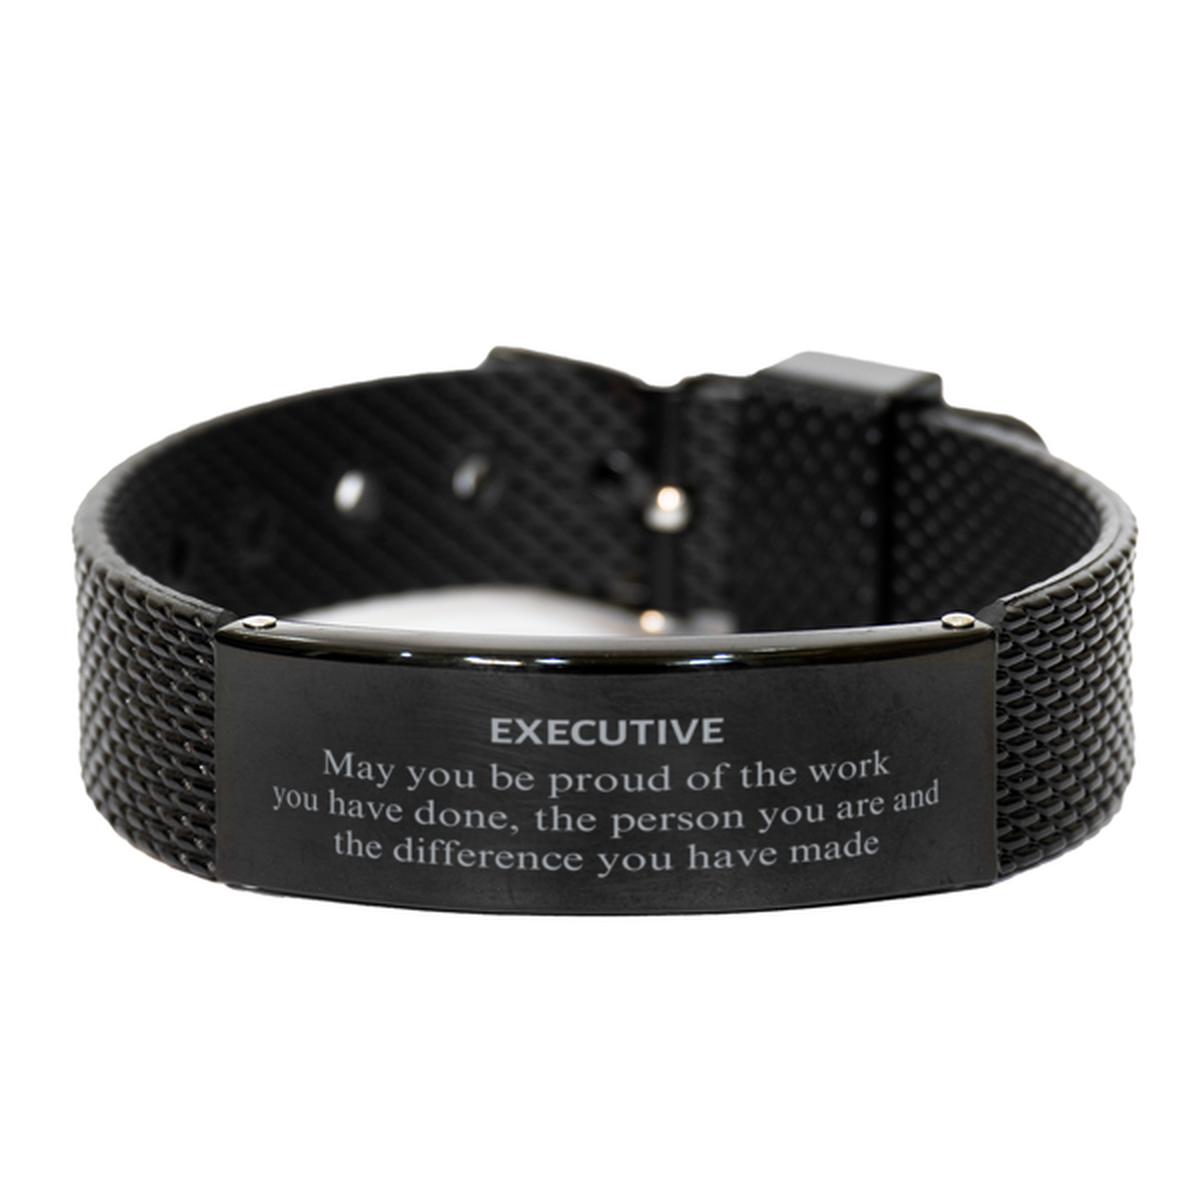 Executive May you be proud of the work you have done, Retirement Executive Black Shark Mesh Bracelet for Colleague Appreciation Gifts Amazing for Executive